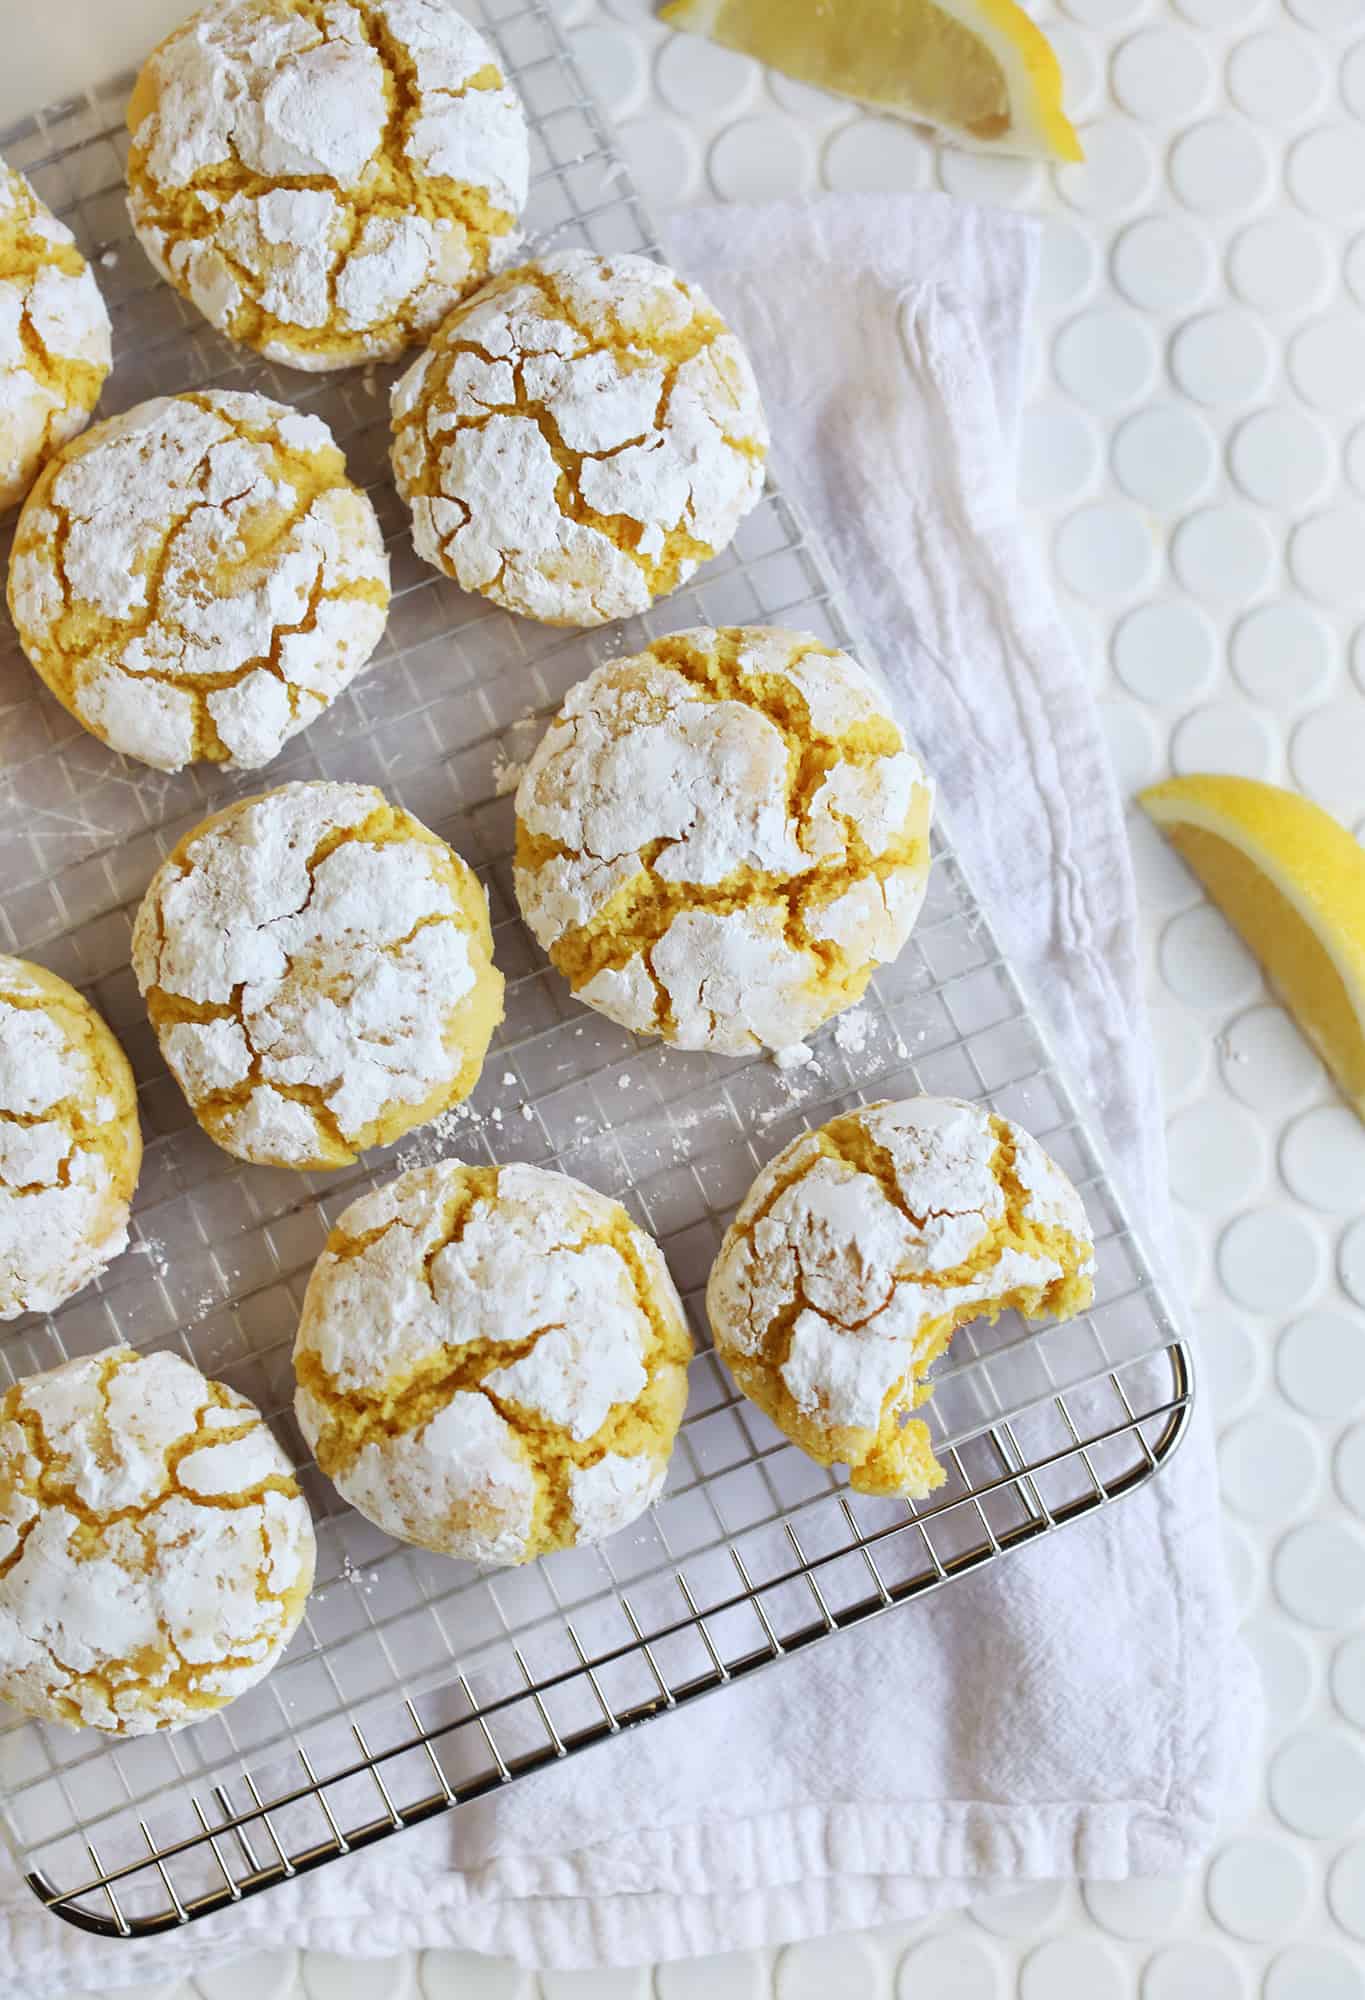 lemon burst crinkle cookies on a cooling rack with one cookie having bite taken out of it and lemons laying next to cooling rack